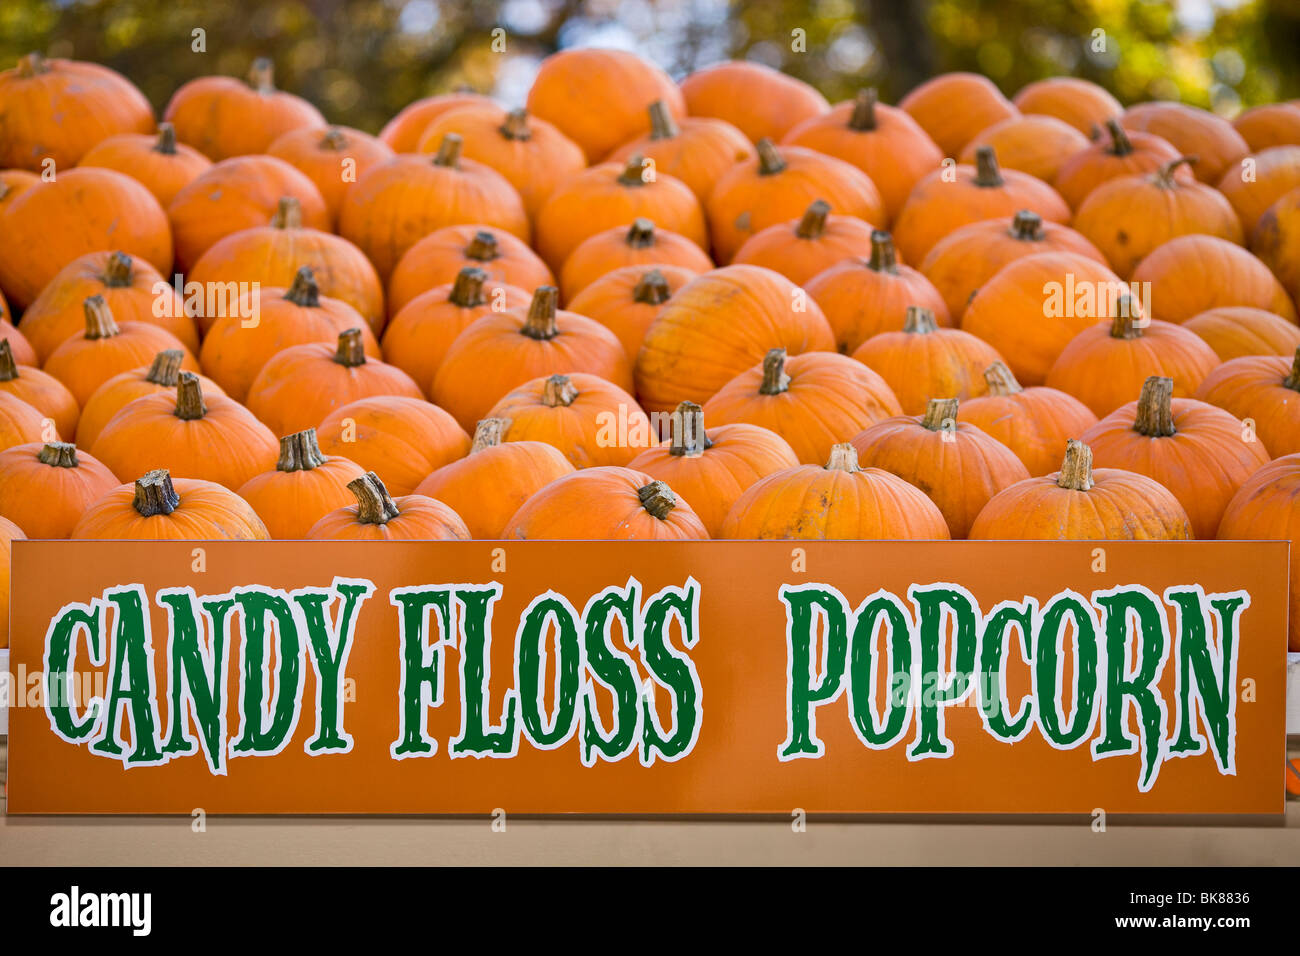 Candy floss and popcorn sign in front of a pile of pumpkins Stock Photo